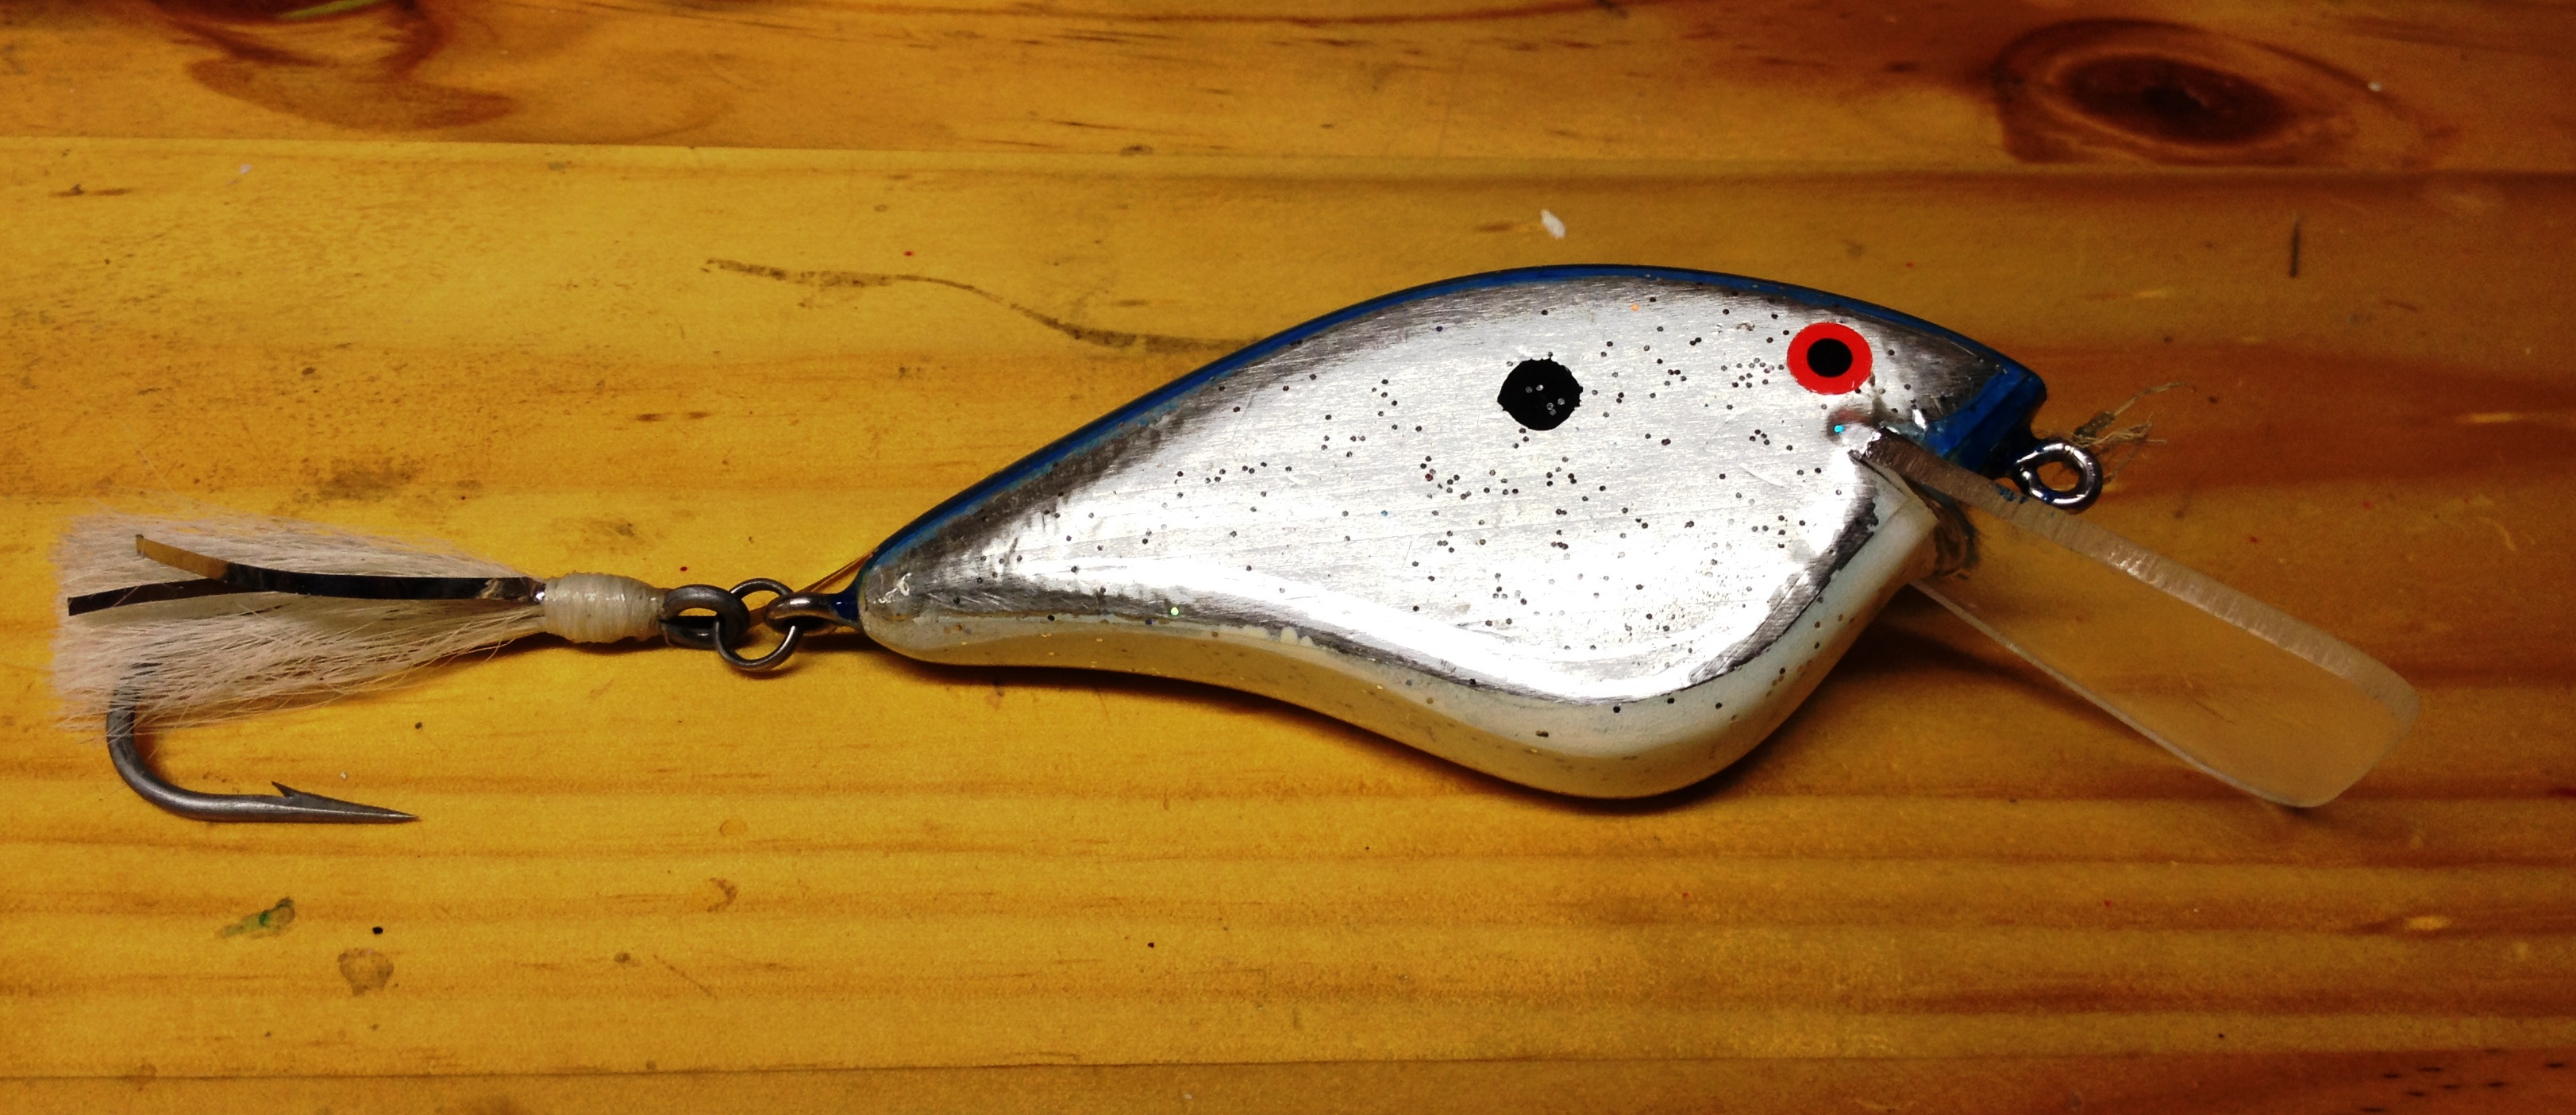 Lure Foil – “on the cheap”  Confessions of a fisherman, hunter and tinkerer